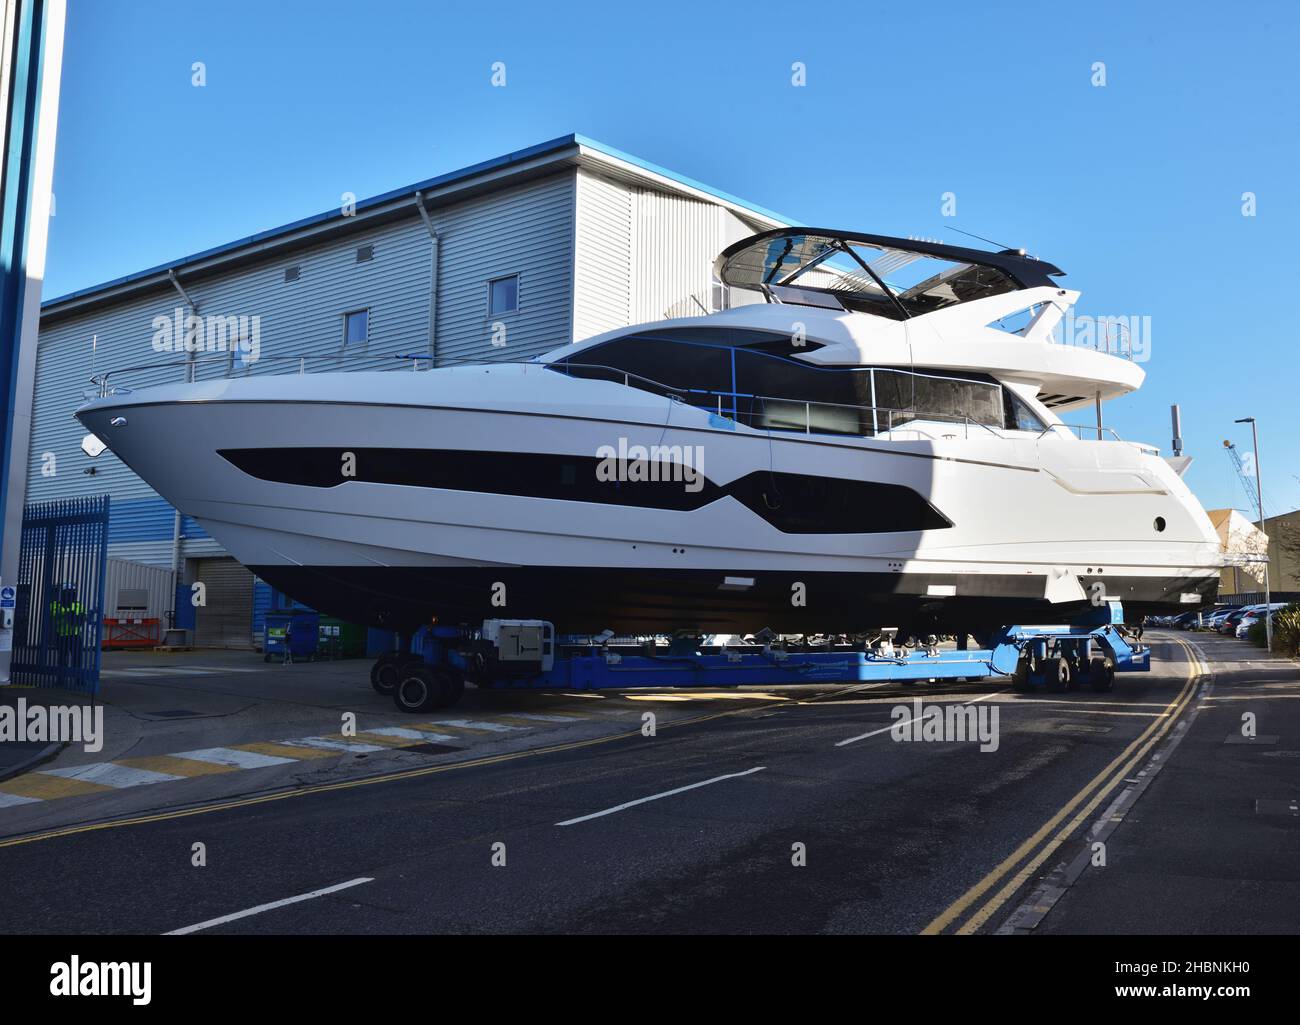 A Sunseeker luxury yacht is moved along a public road on a remotely-controlled motorised trolley in Poole, Dorset. Stock Photo